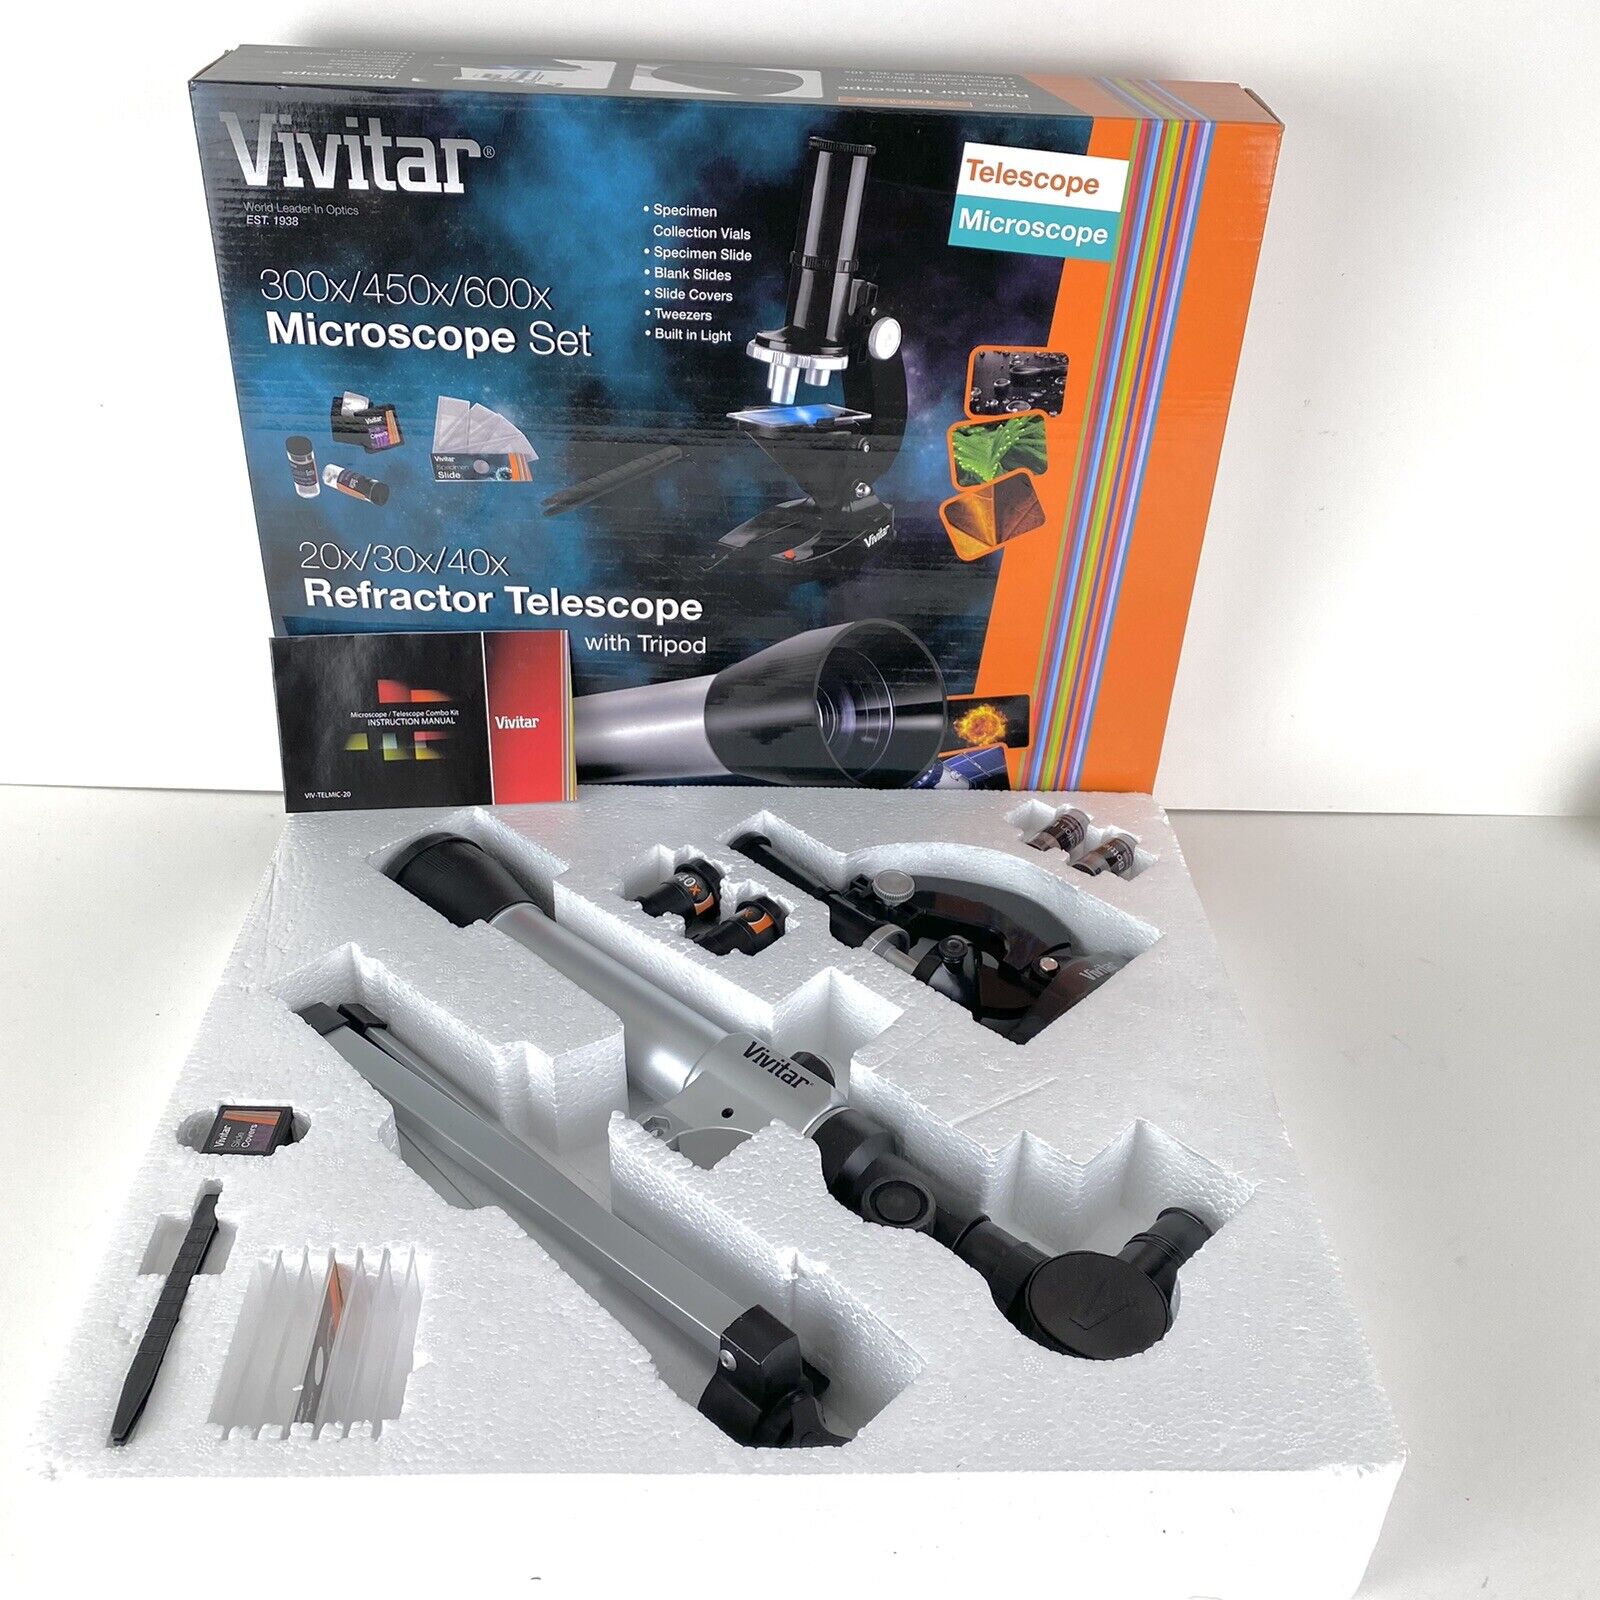 Vivitar Microscope Set And Refractor Telescope with Tripod Boxed Set Complete